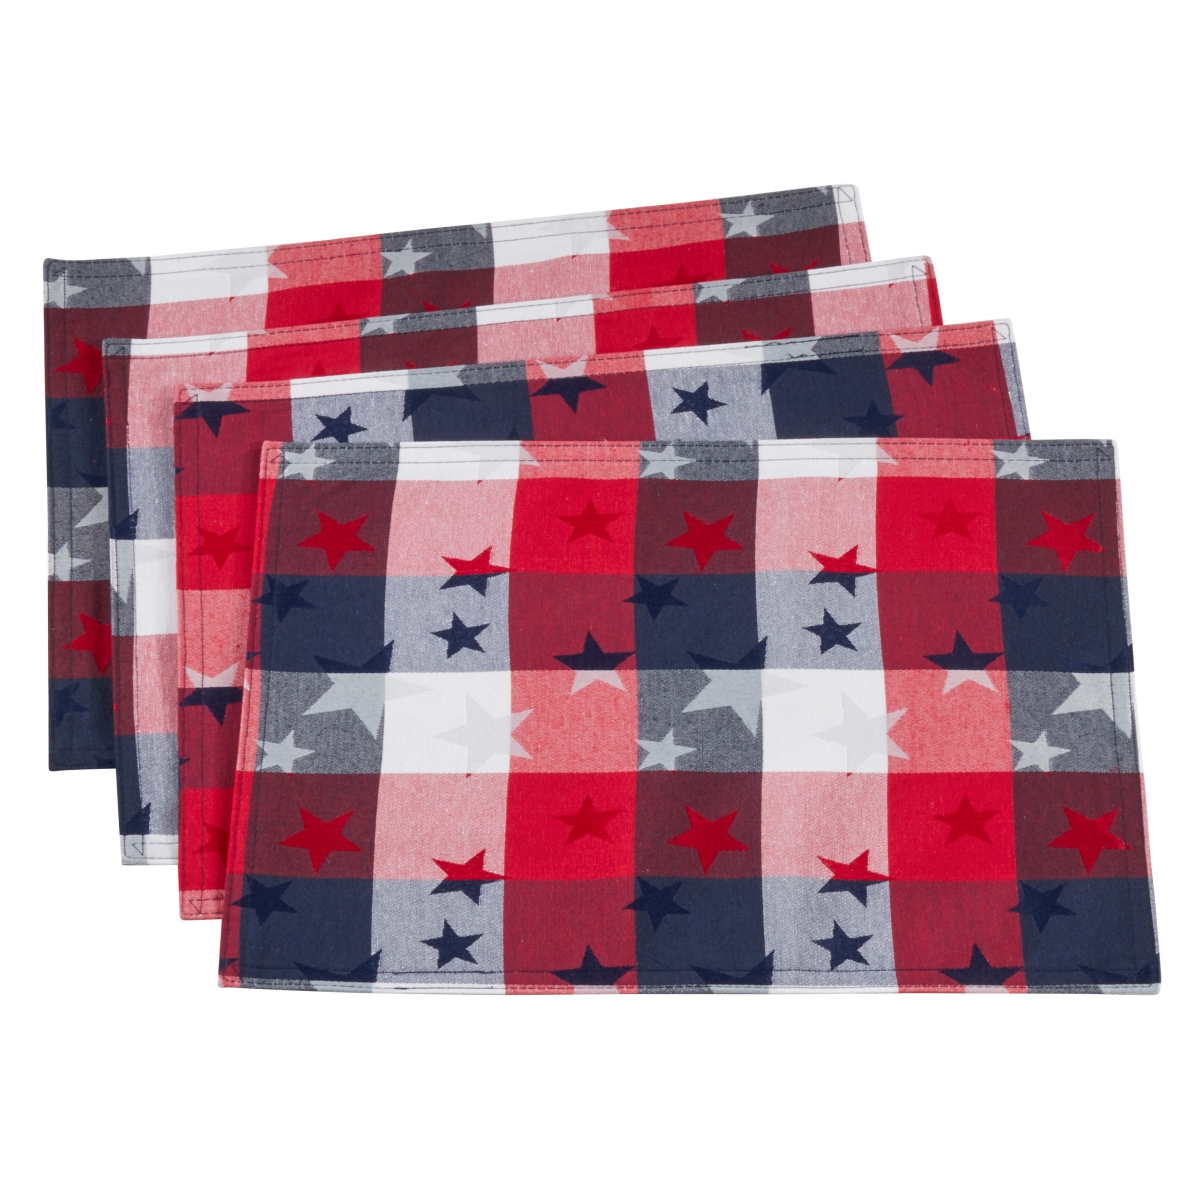 Cookhouse SARO  13 x 19 in. Rectangular Stars Design Checkered Placemats - Multi Color  Set of 4